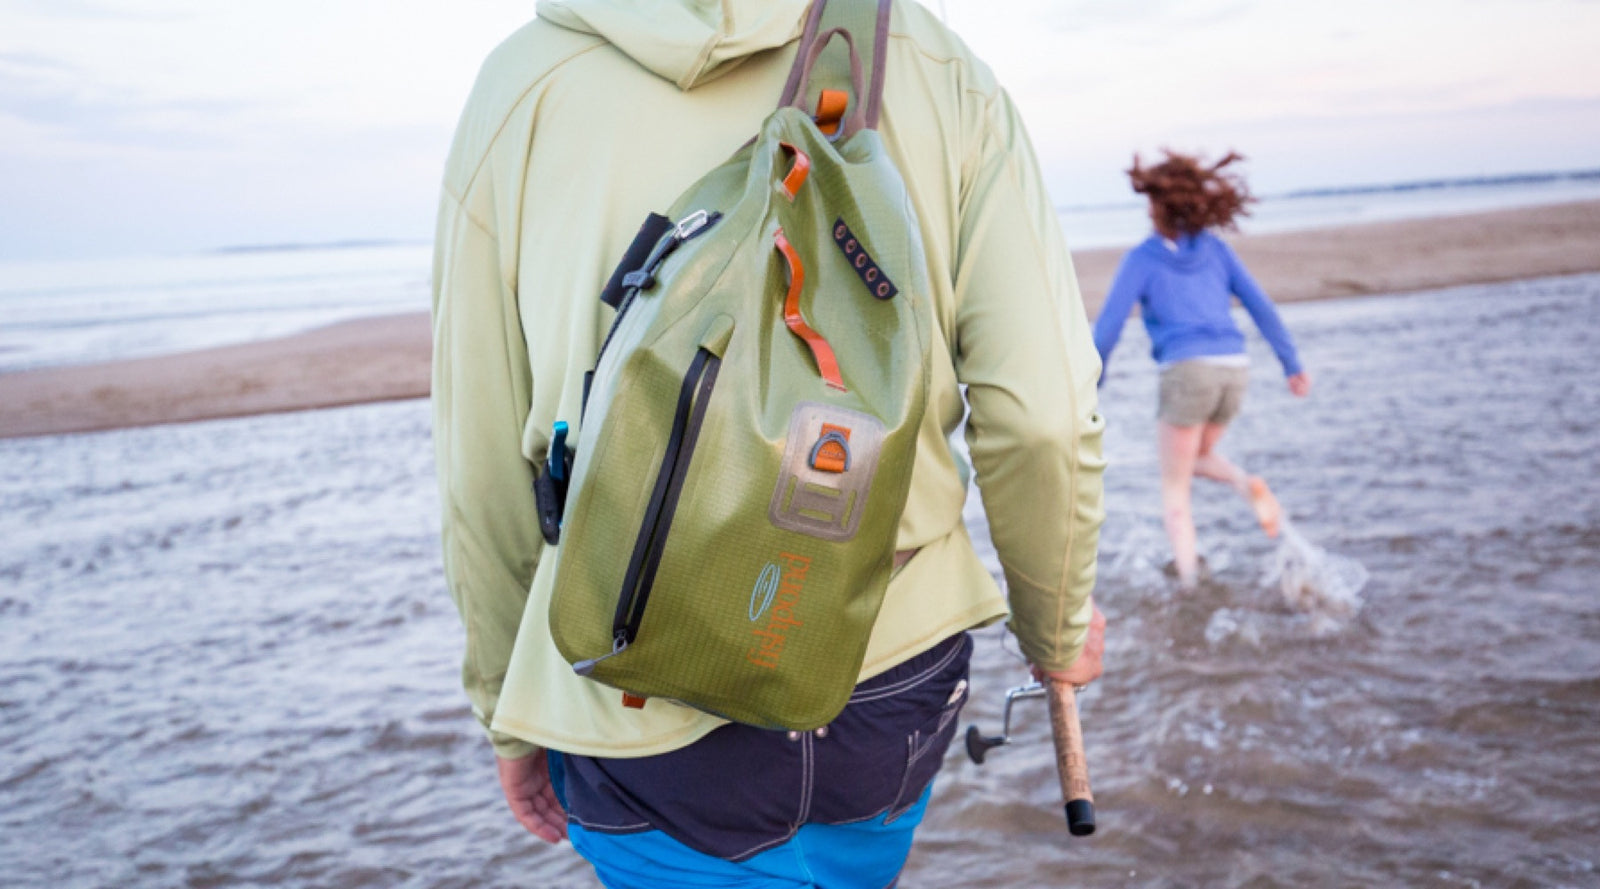 Gear Review: Fishpond Thunderhead Sling Pack - The Compleat Angler